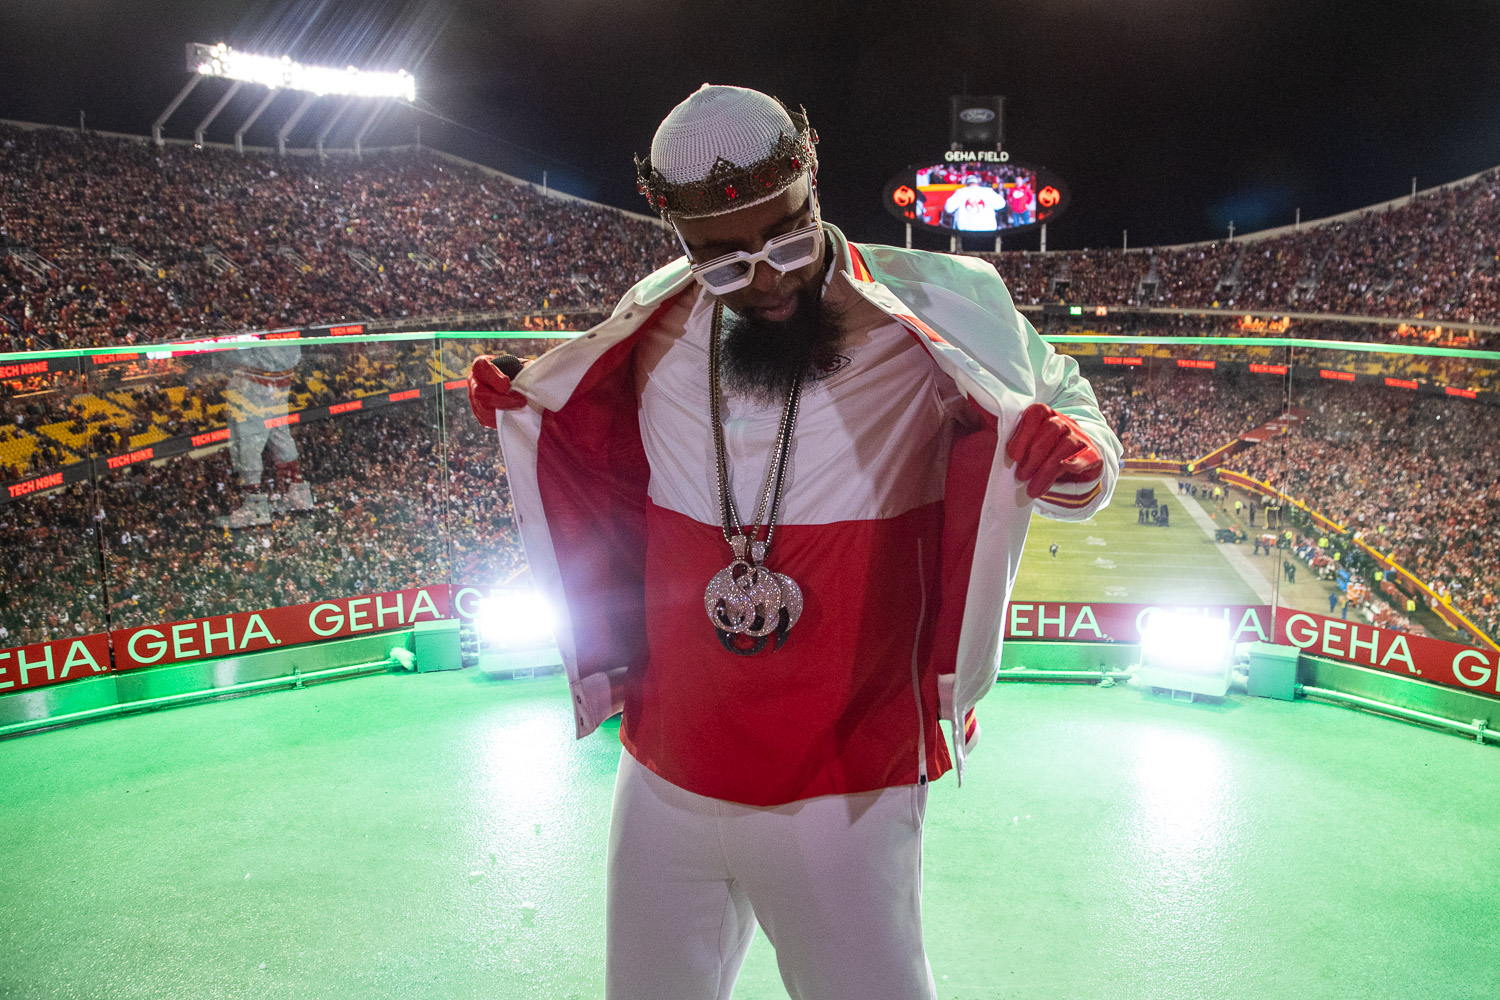 Tech N9ne performing during halftime of the wildcard playoff football game between the Kansas City Chiefs and the Pittsburgh Steelers, Sunday, January 16, 2022 in Kansas City.